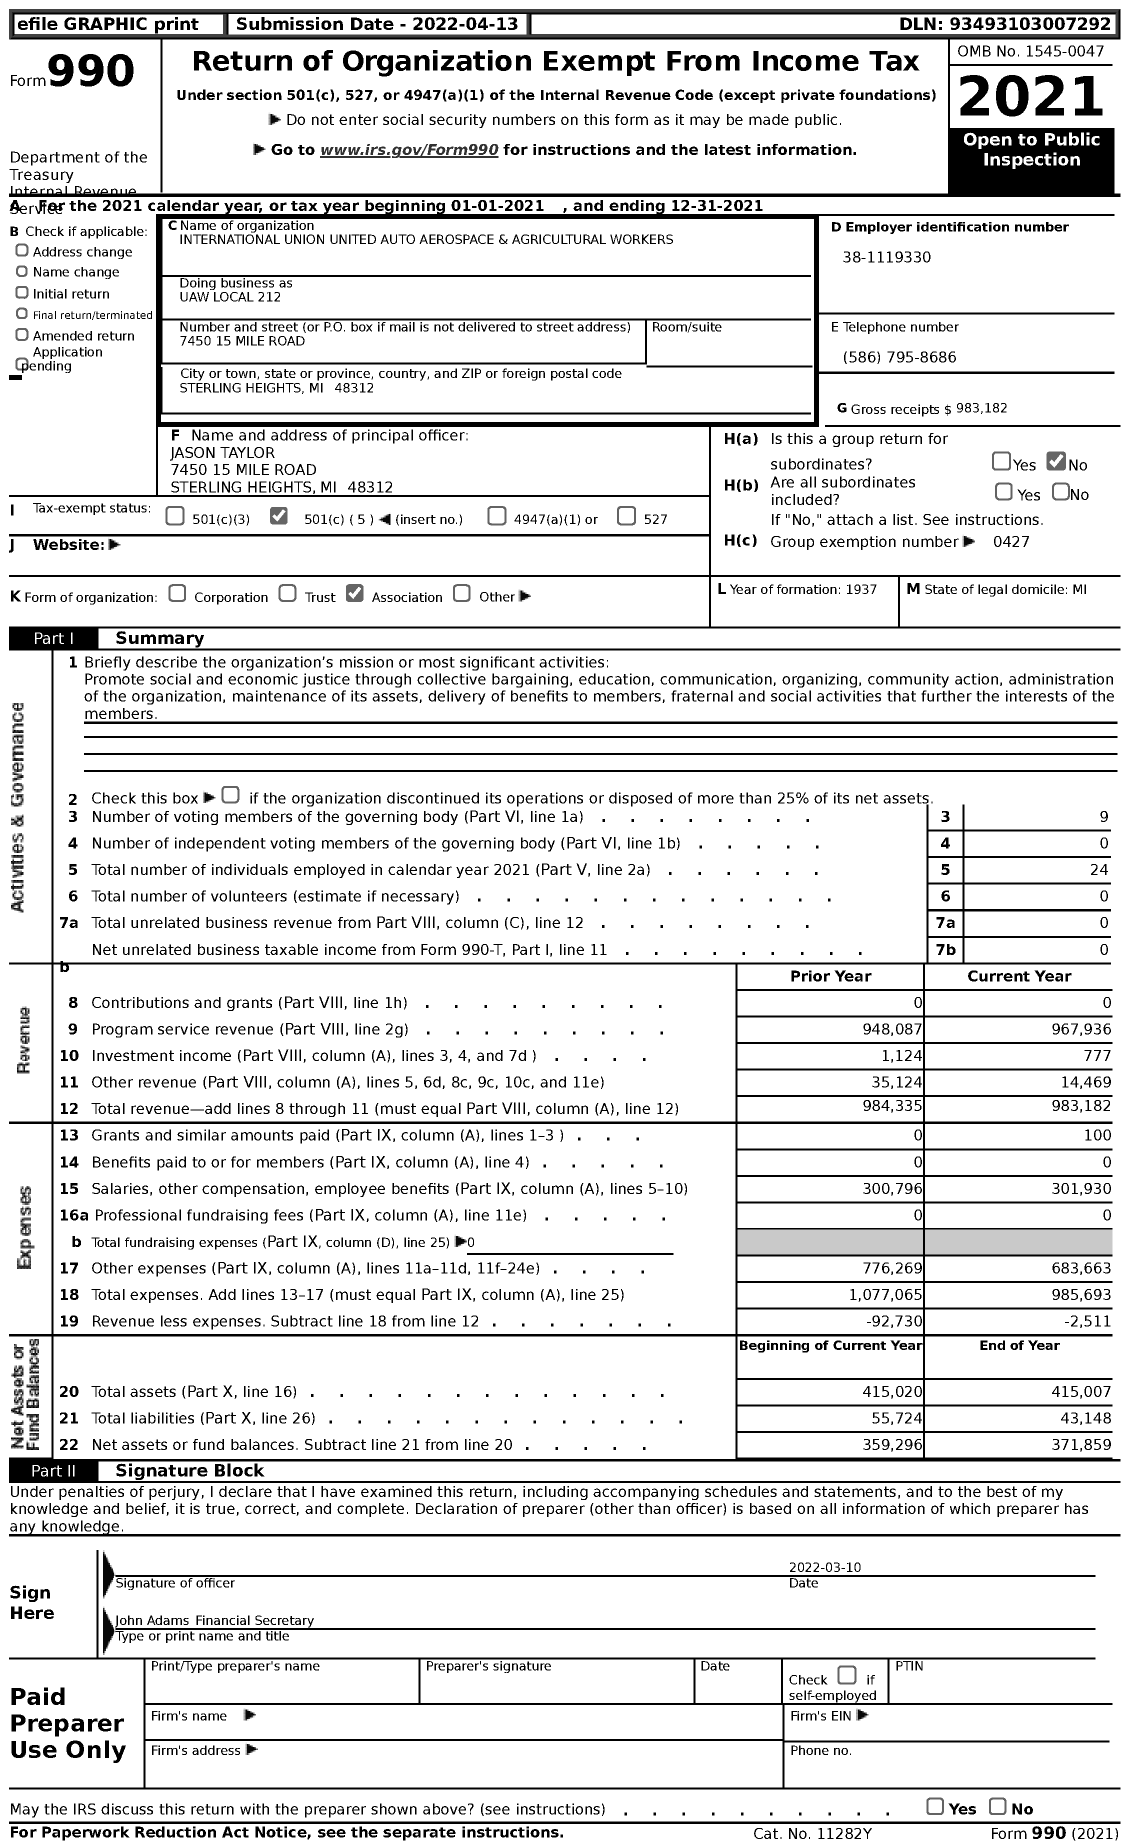 Image of first page of 2021 Form 990 for Uaw - International Union United Auto Aerospace and Agricultural Workers / Uaw Local 212